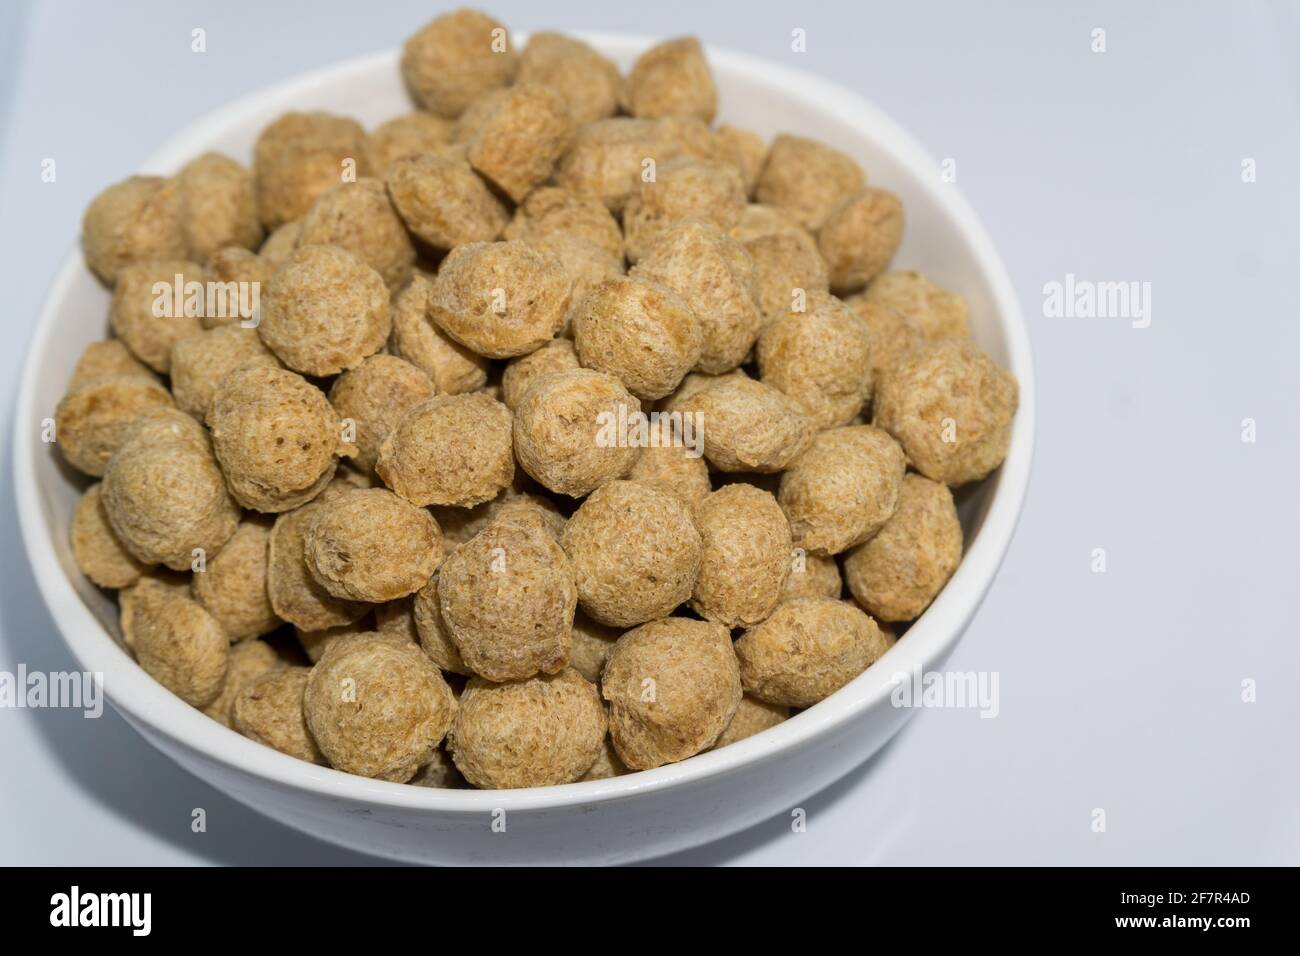 A close up shot of soya bean nuggets in a bowl with white background. Soya nuggets are a rich source of protein especially for vegans. Stock Photo